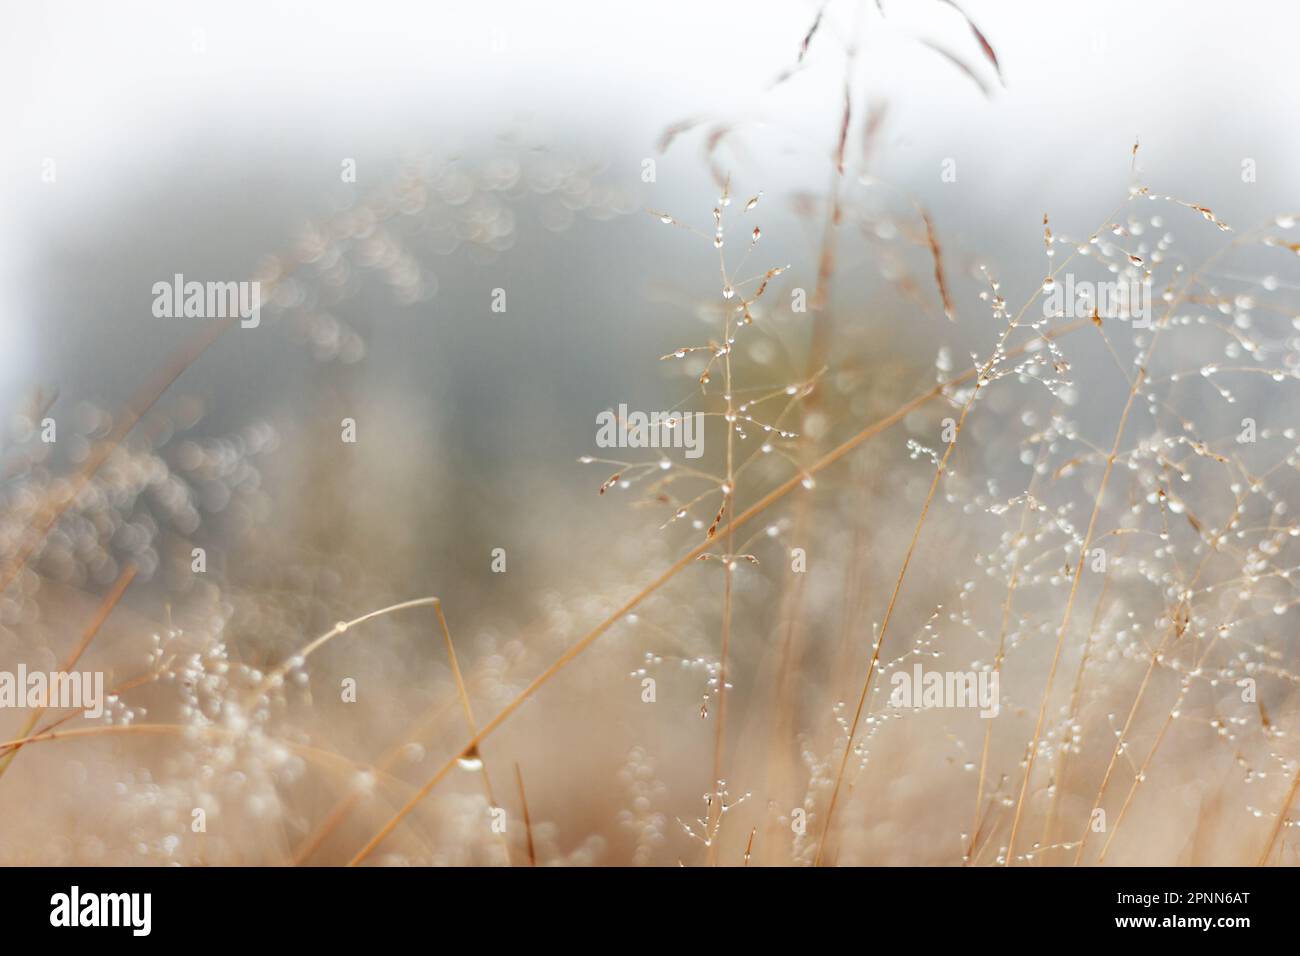 Slow life. Dew drops on the grass. Nature motif Stock Photo